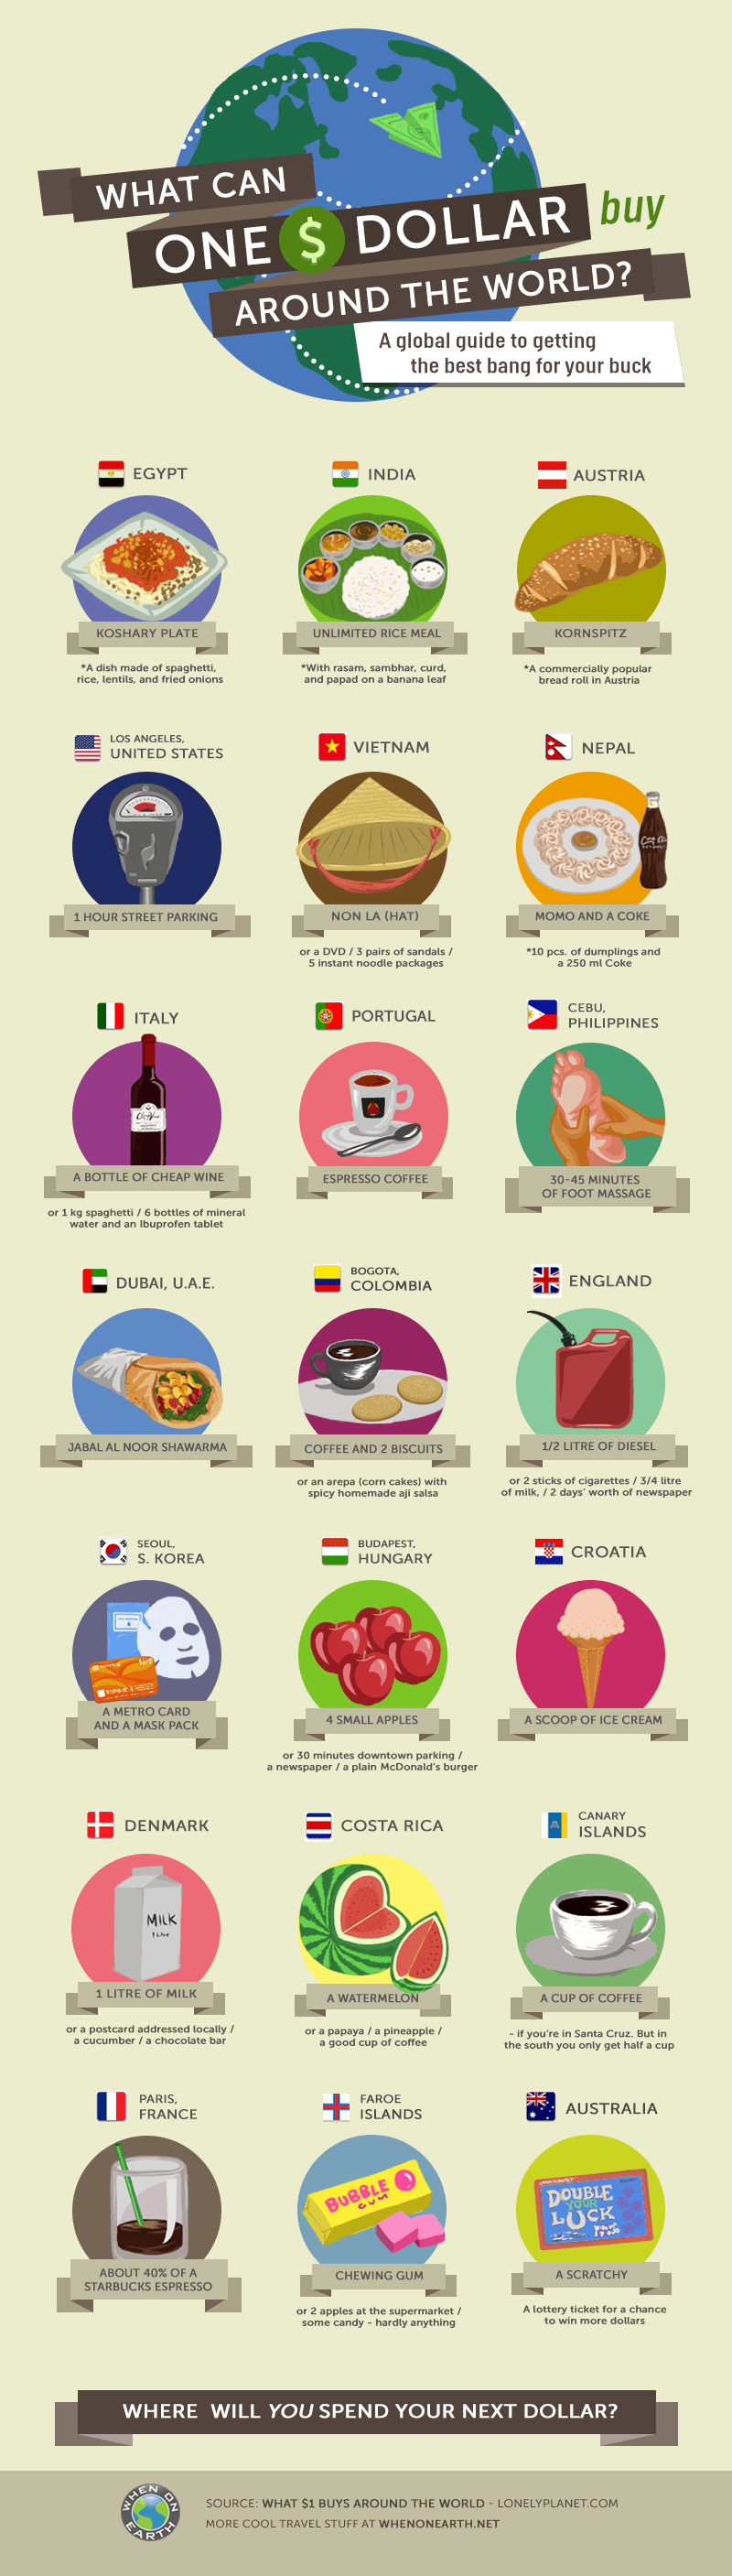 what-can-one-dollar-buy-around-the-world-11